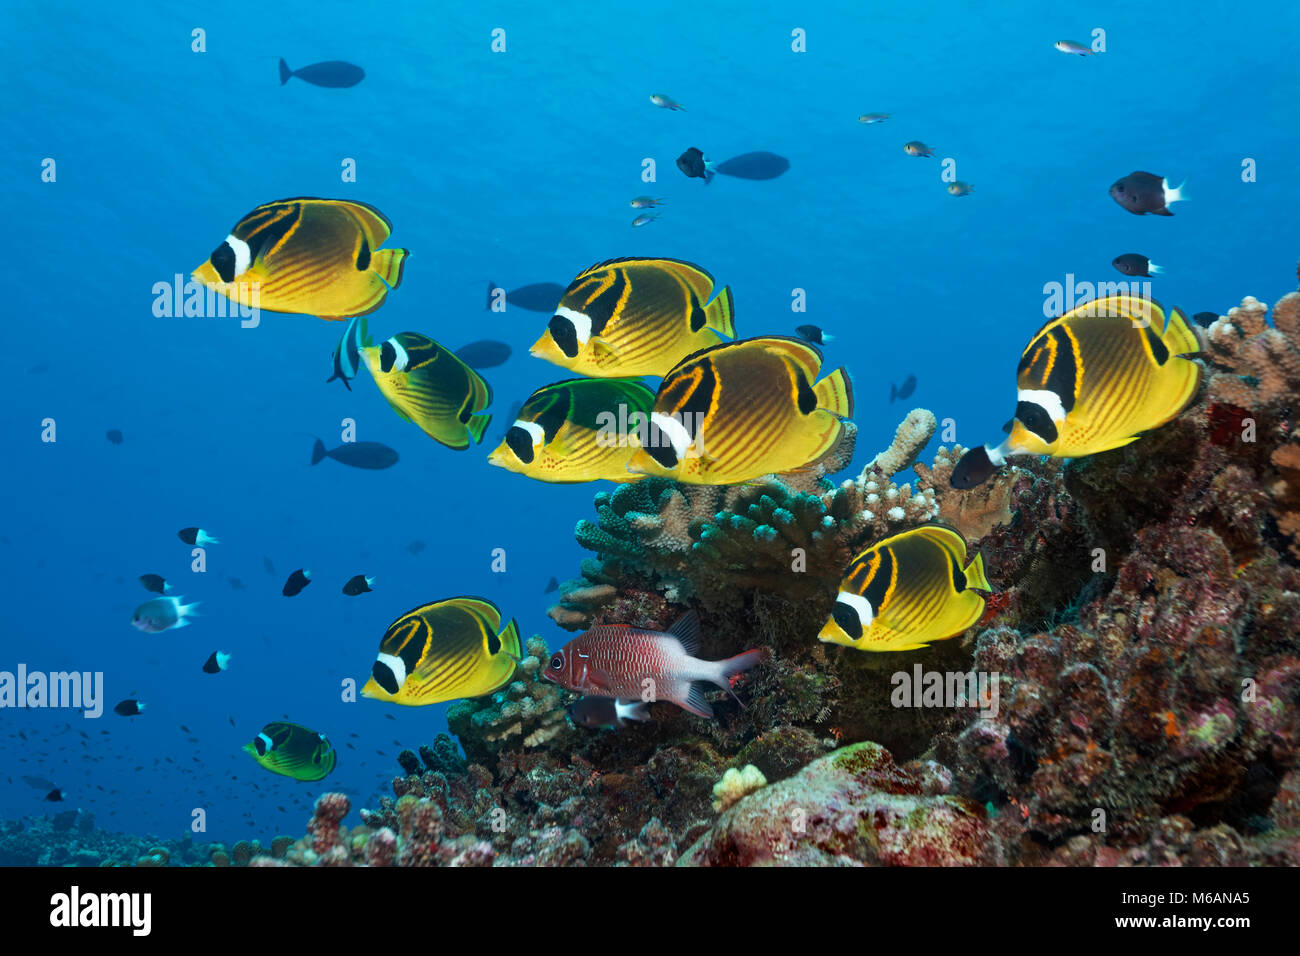 Swarm Raccoon butterflyfish (Chaetodon lunula), yellow, together with Sabre squirrelfish (Sargocentron spiniferum) Stock Photo